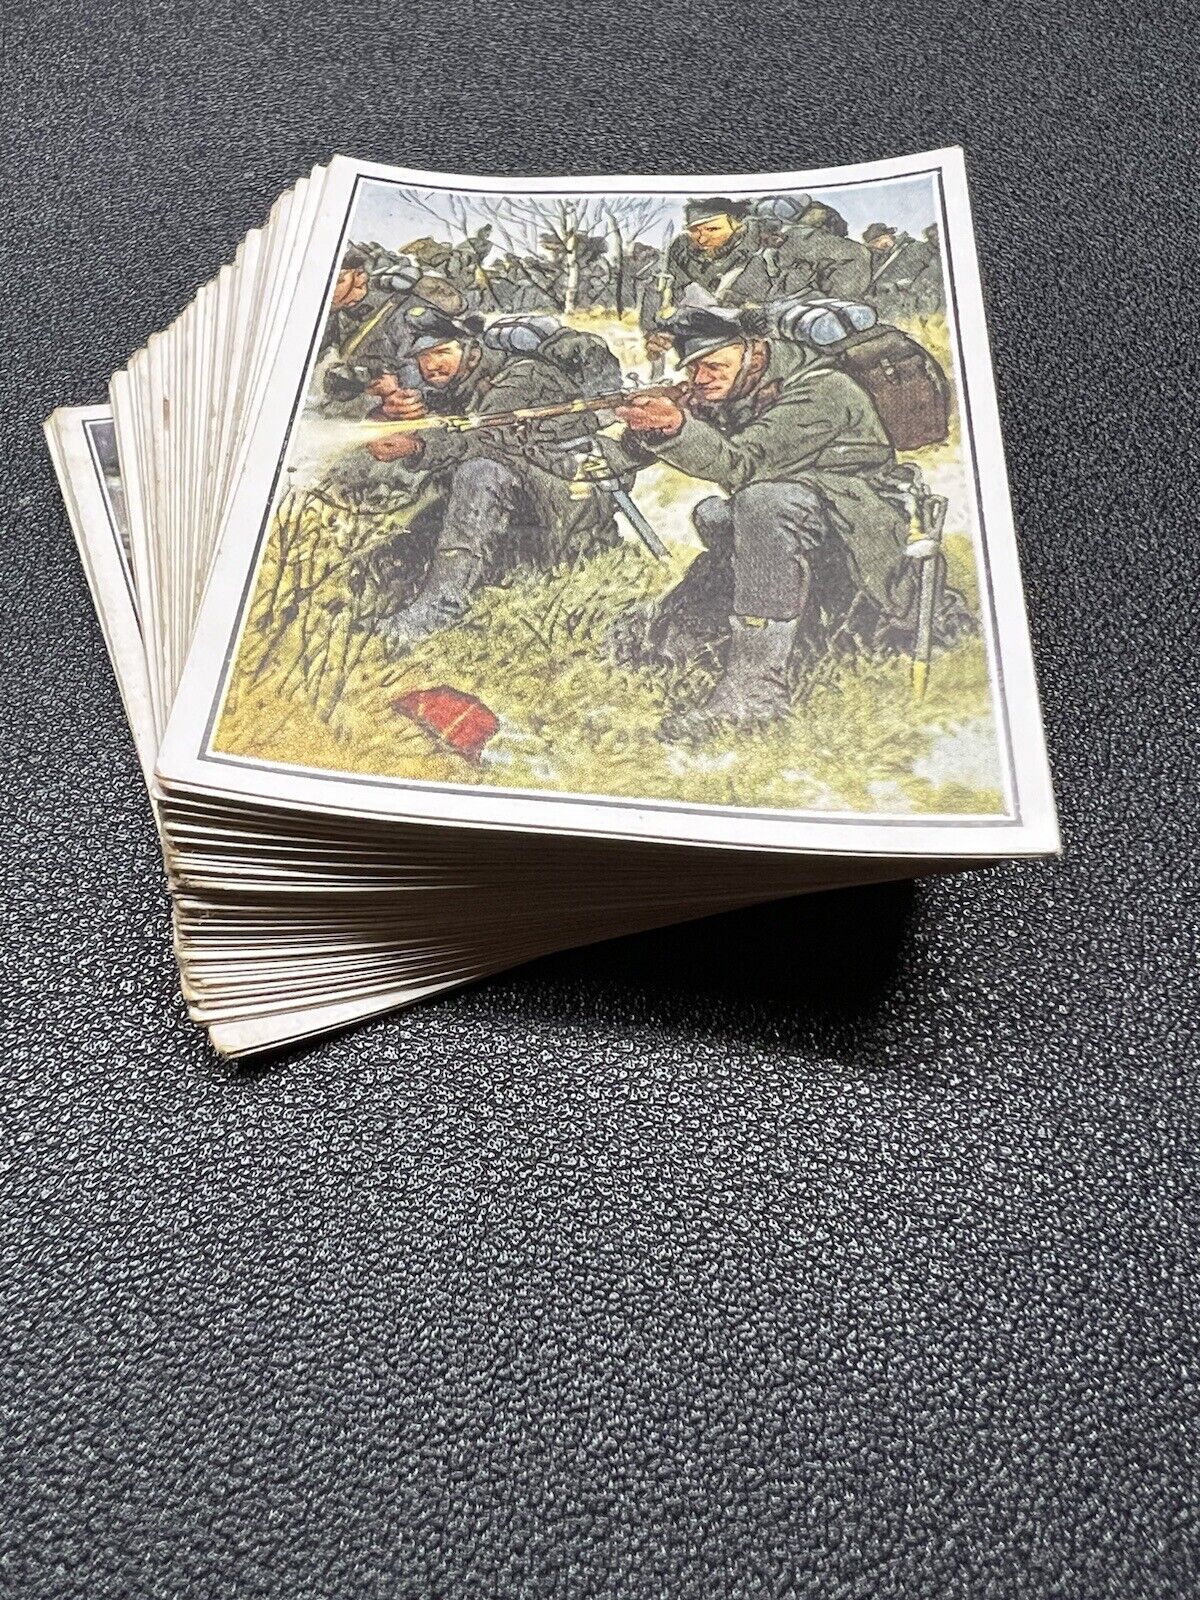 1933 GERMAN ARMY HISTORY & TRADITION REICHSHEER 63 CIGARETTE CARDS MILITARY ART